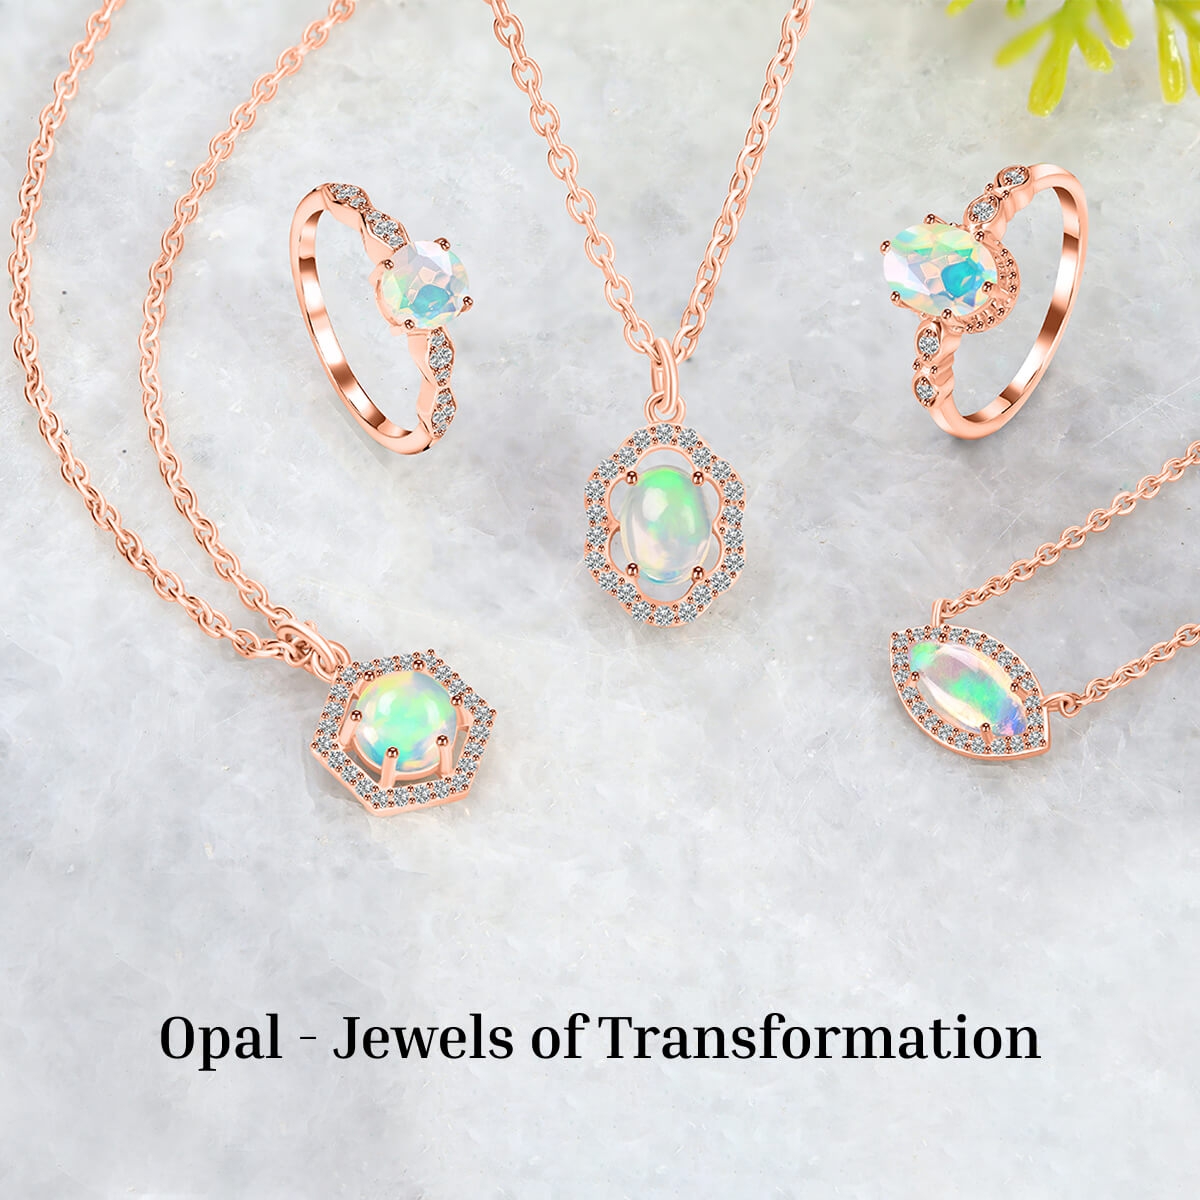 Opal Stone Meaning, Uses, Properties, Value, & More